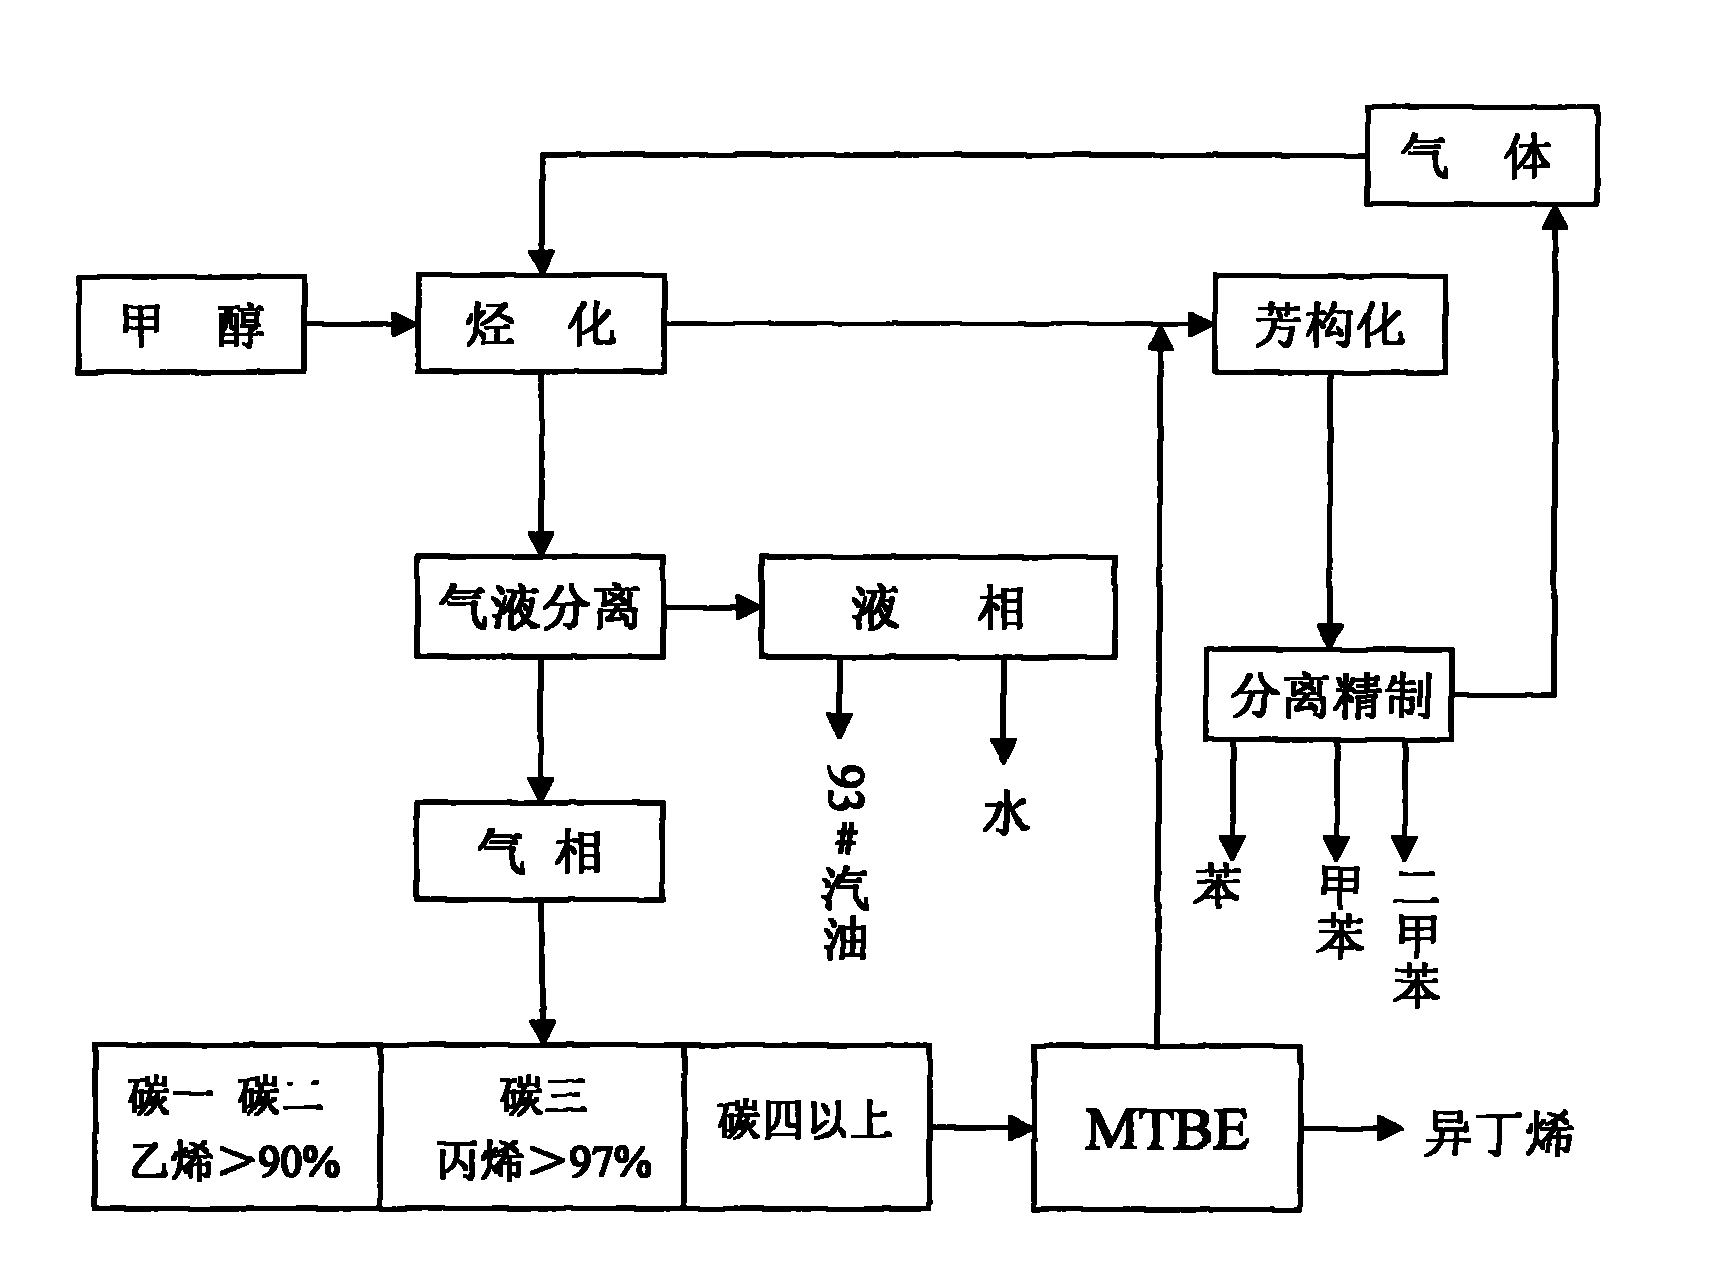 Process for producing low carbon olefin and arene parallel cogeneration gasoline by using methanol as raw material